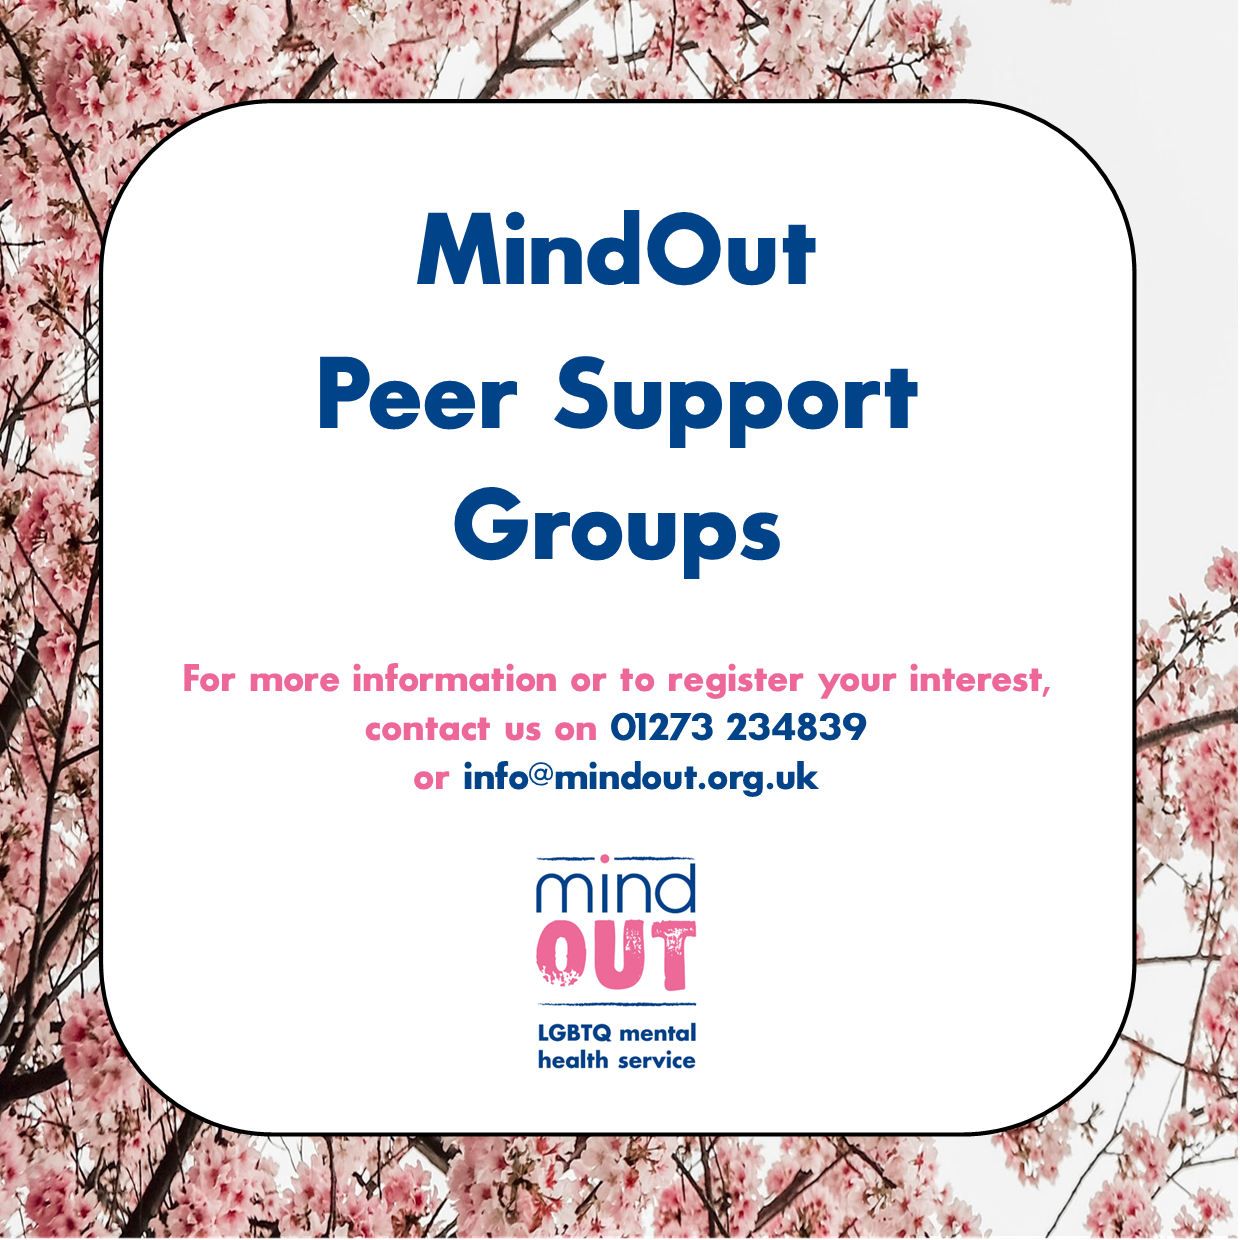 The words 'MindOut Peer Support Groups' in blue, contact details below, and the MindOut logo below that, in pink and blue. The image has a cherry blossom border.